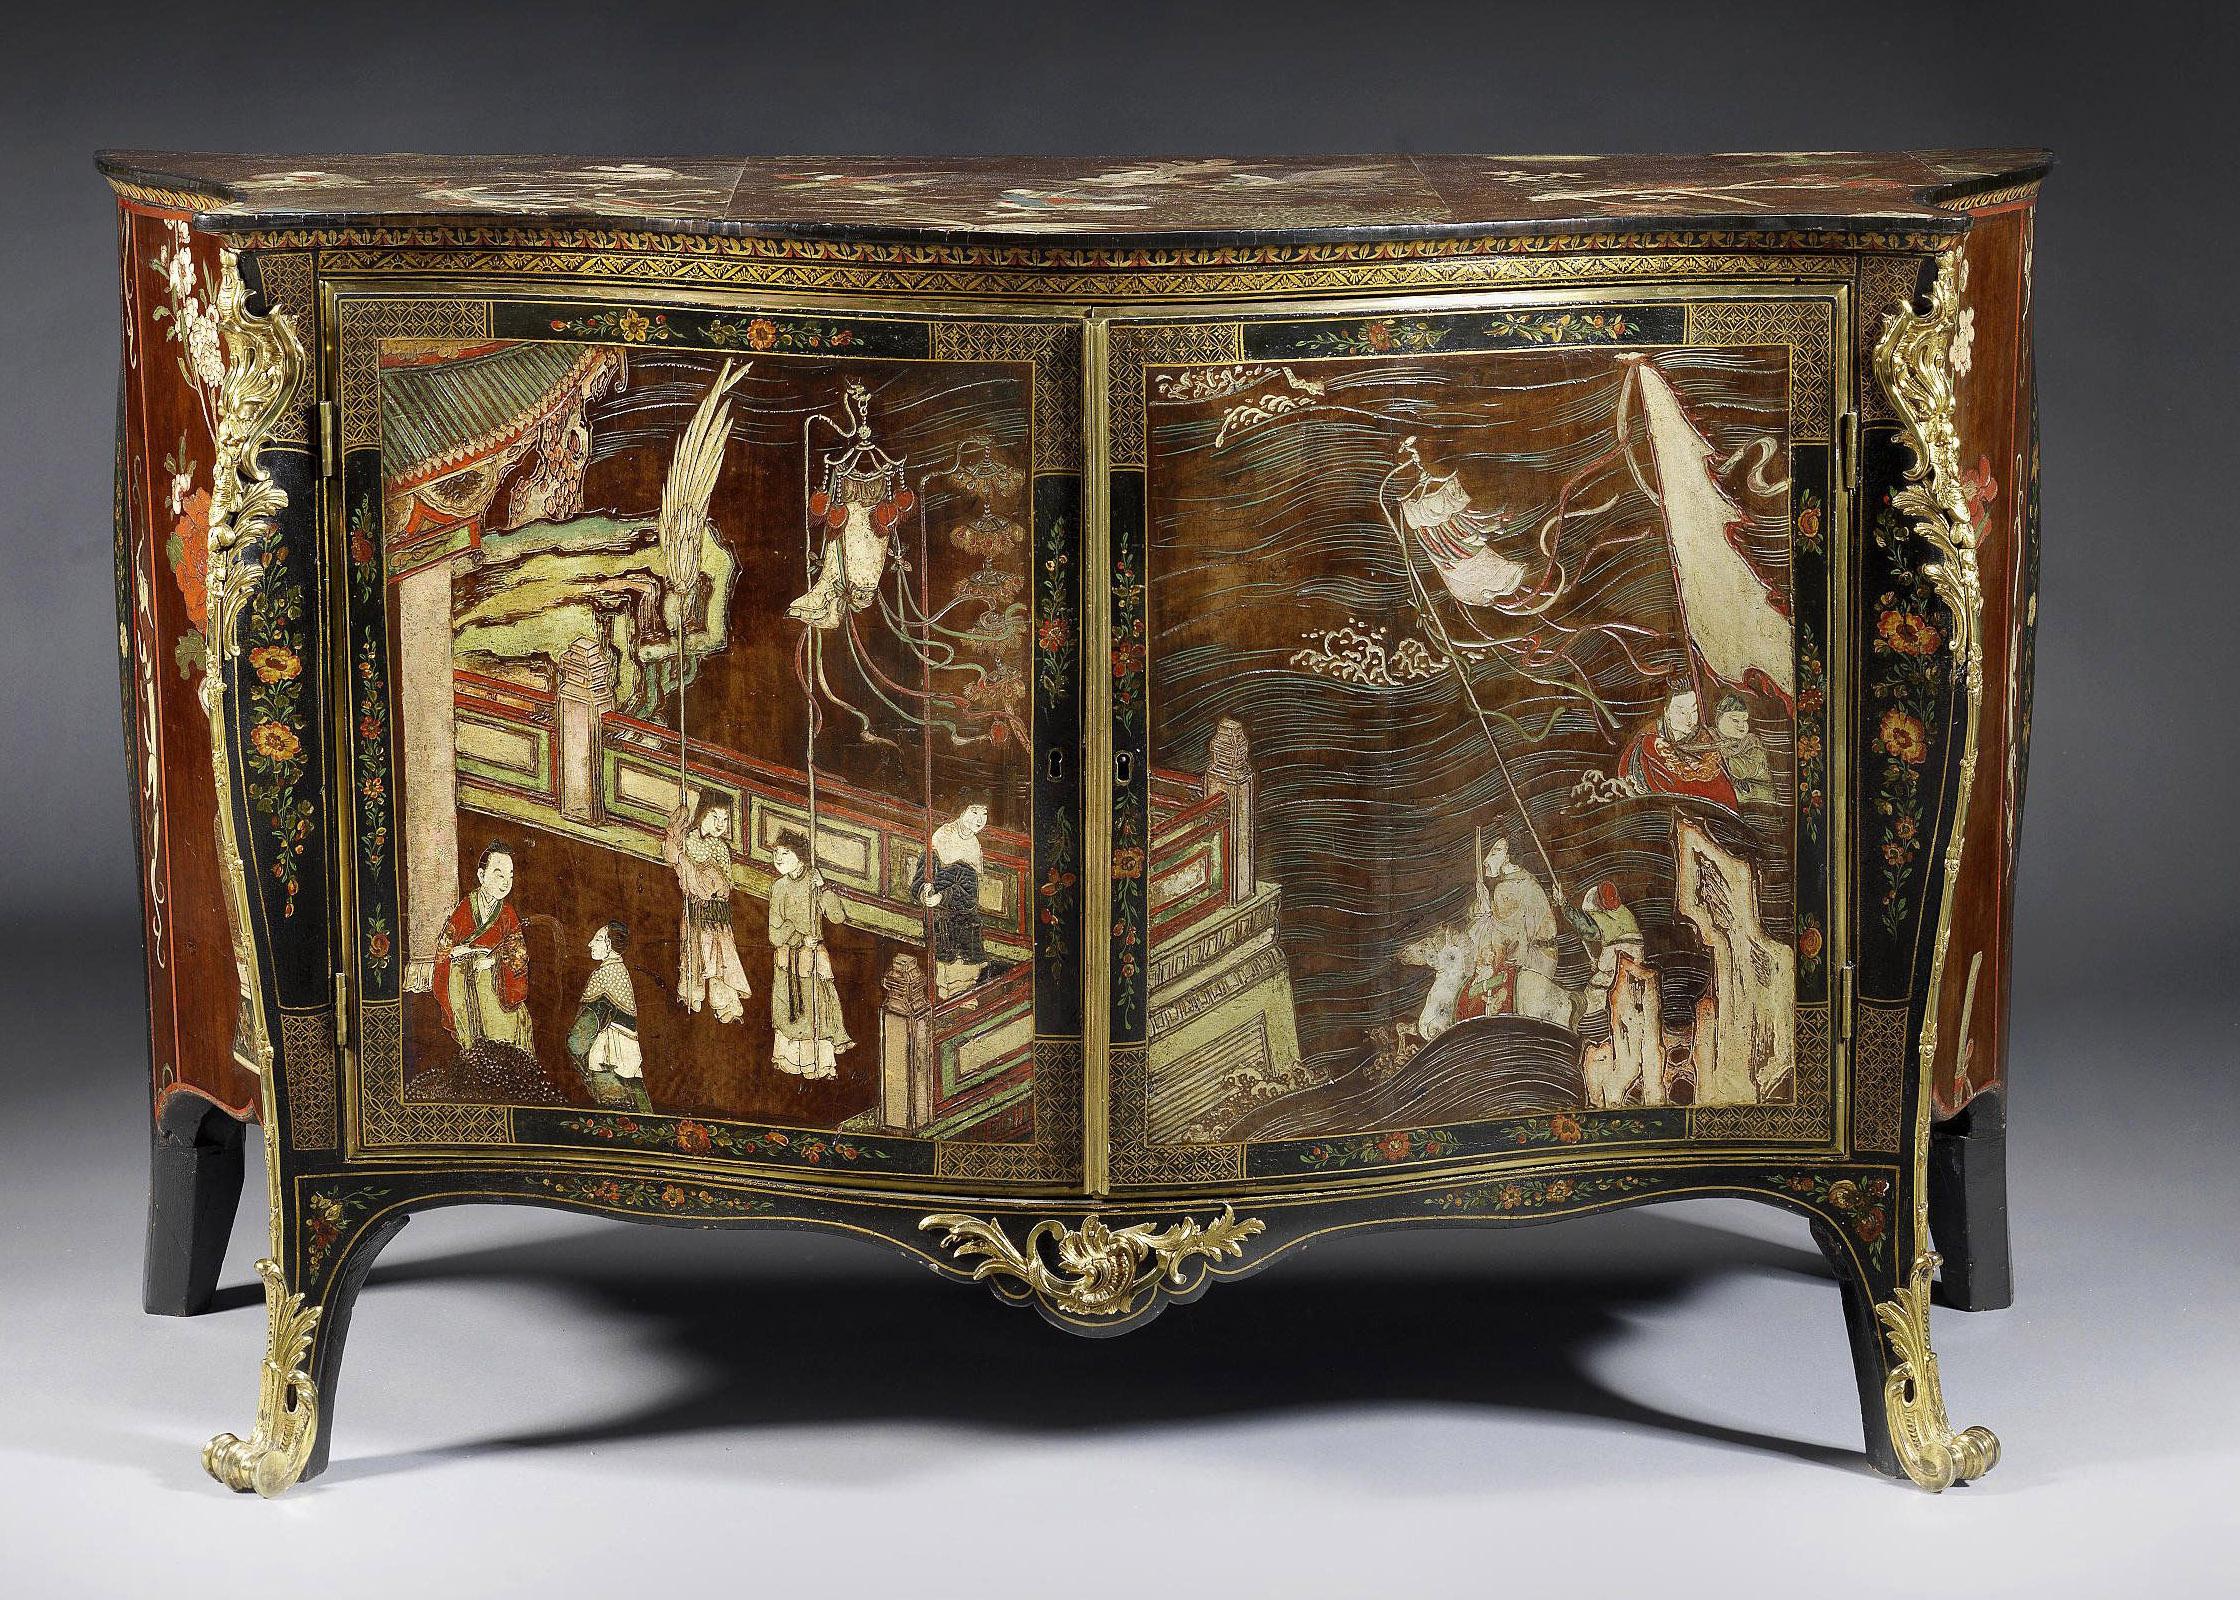 Carved George III Coromandel Lacquer, Gilt Brass-Mounted Serpentine Commode For Sale